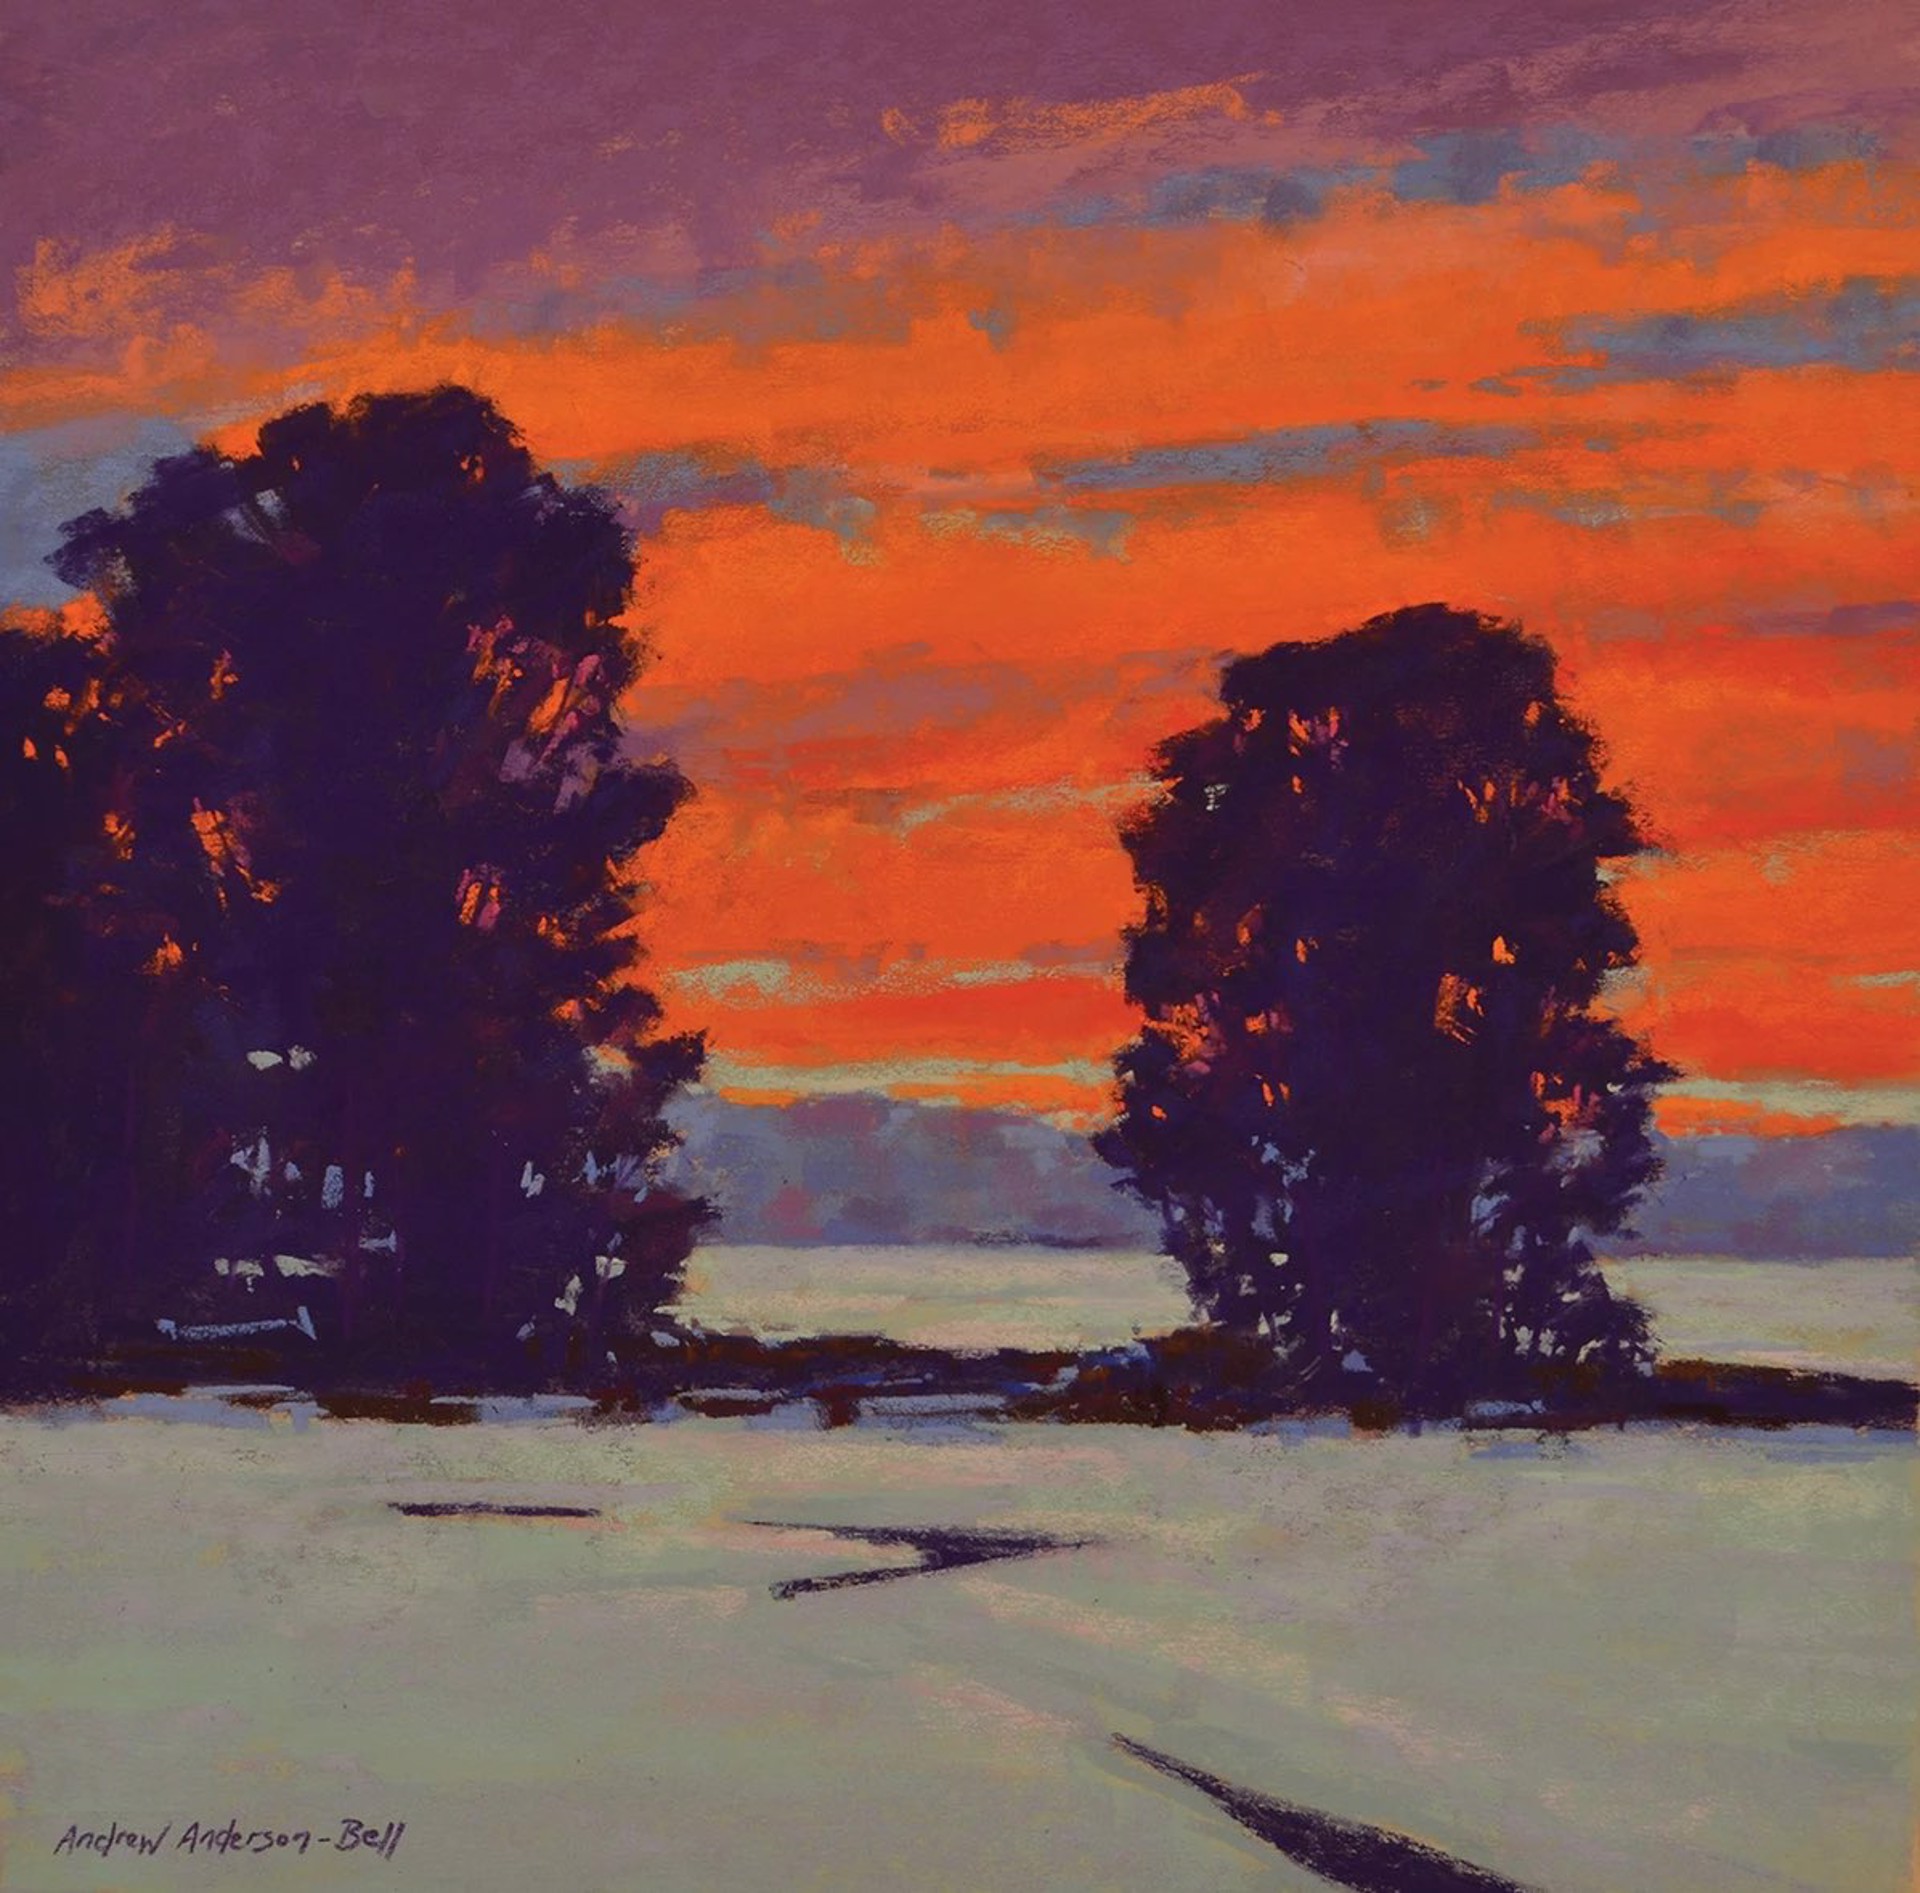 Winter Sky Ablaze by Andrew Anderson-Bell